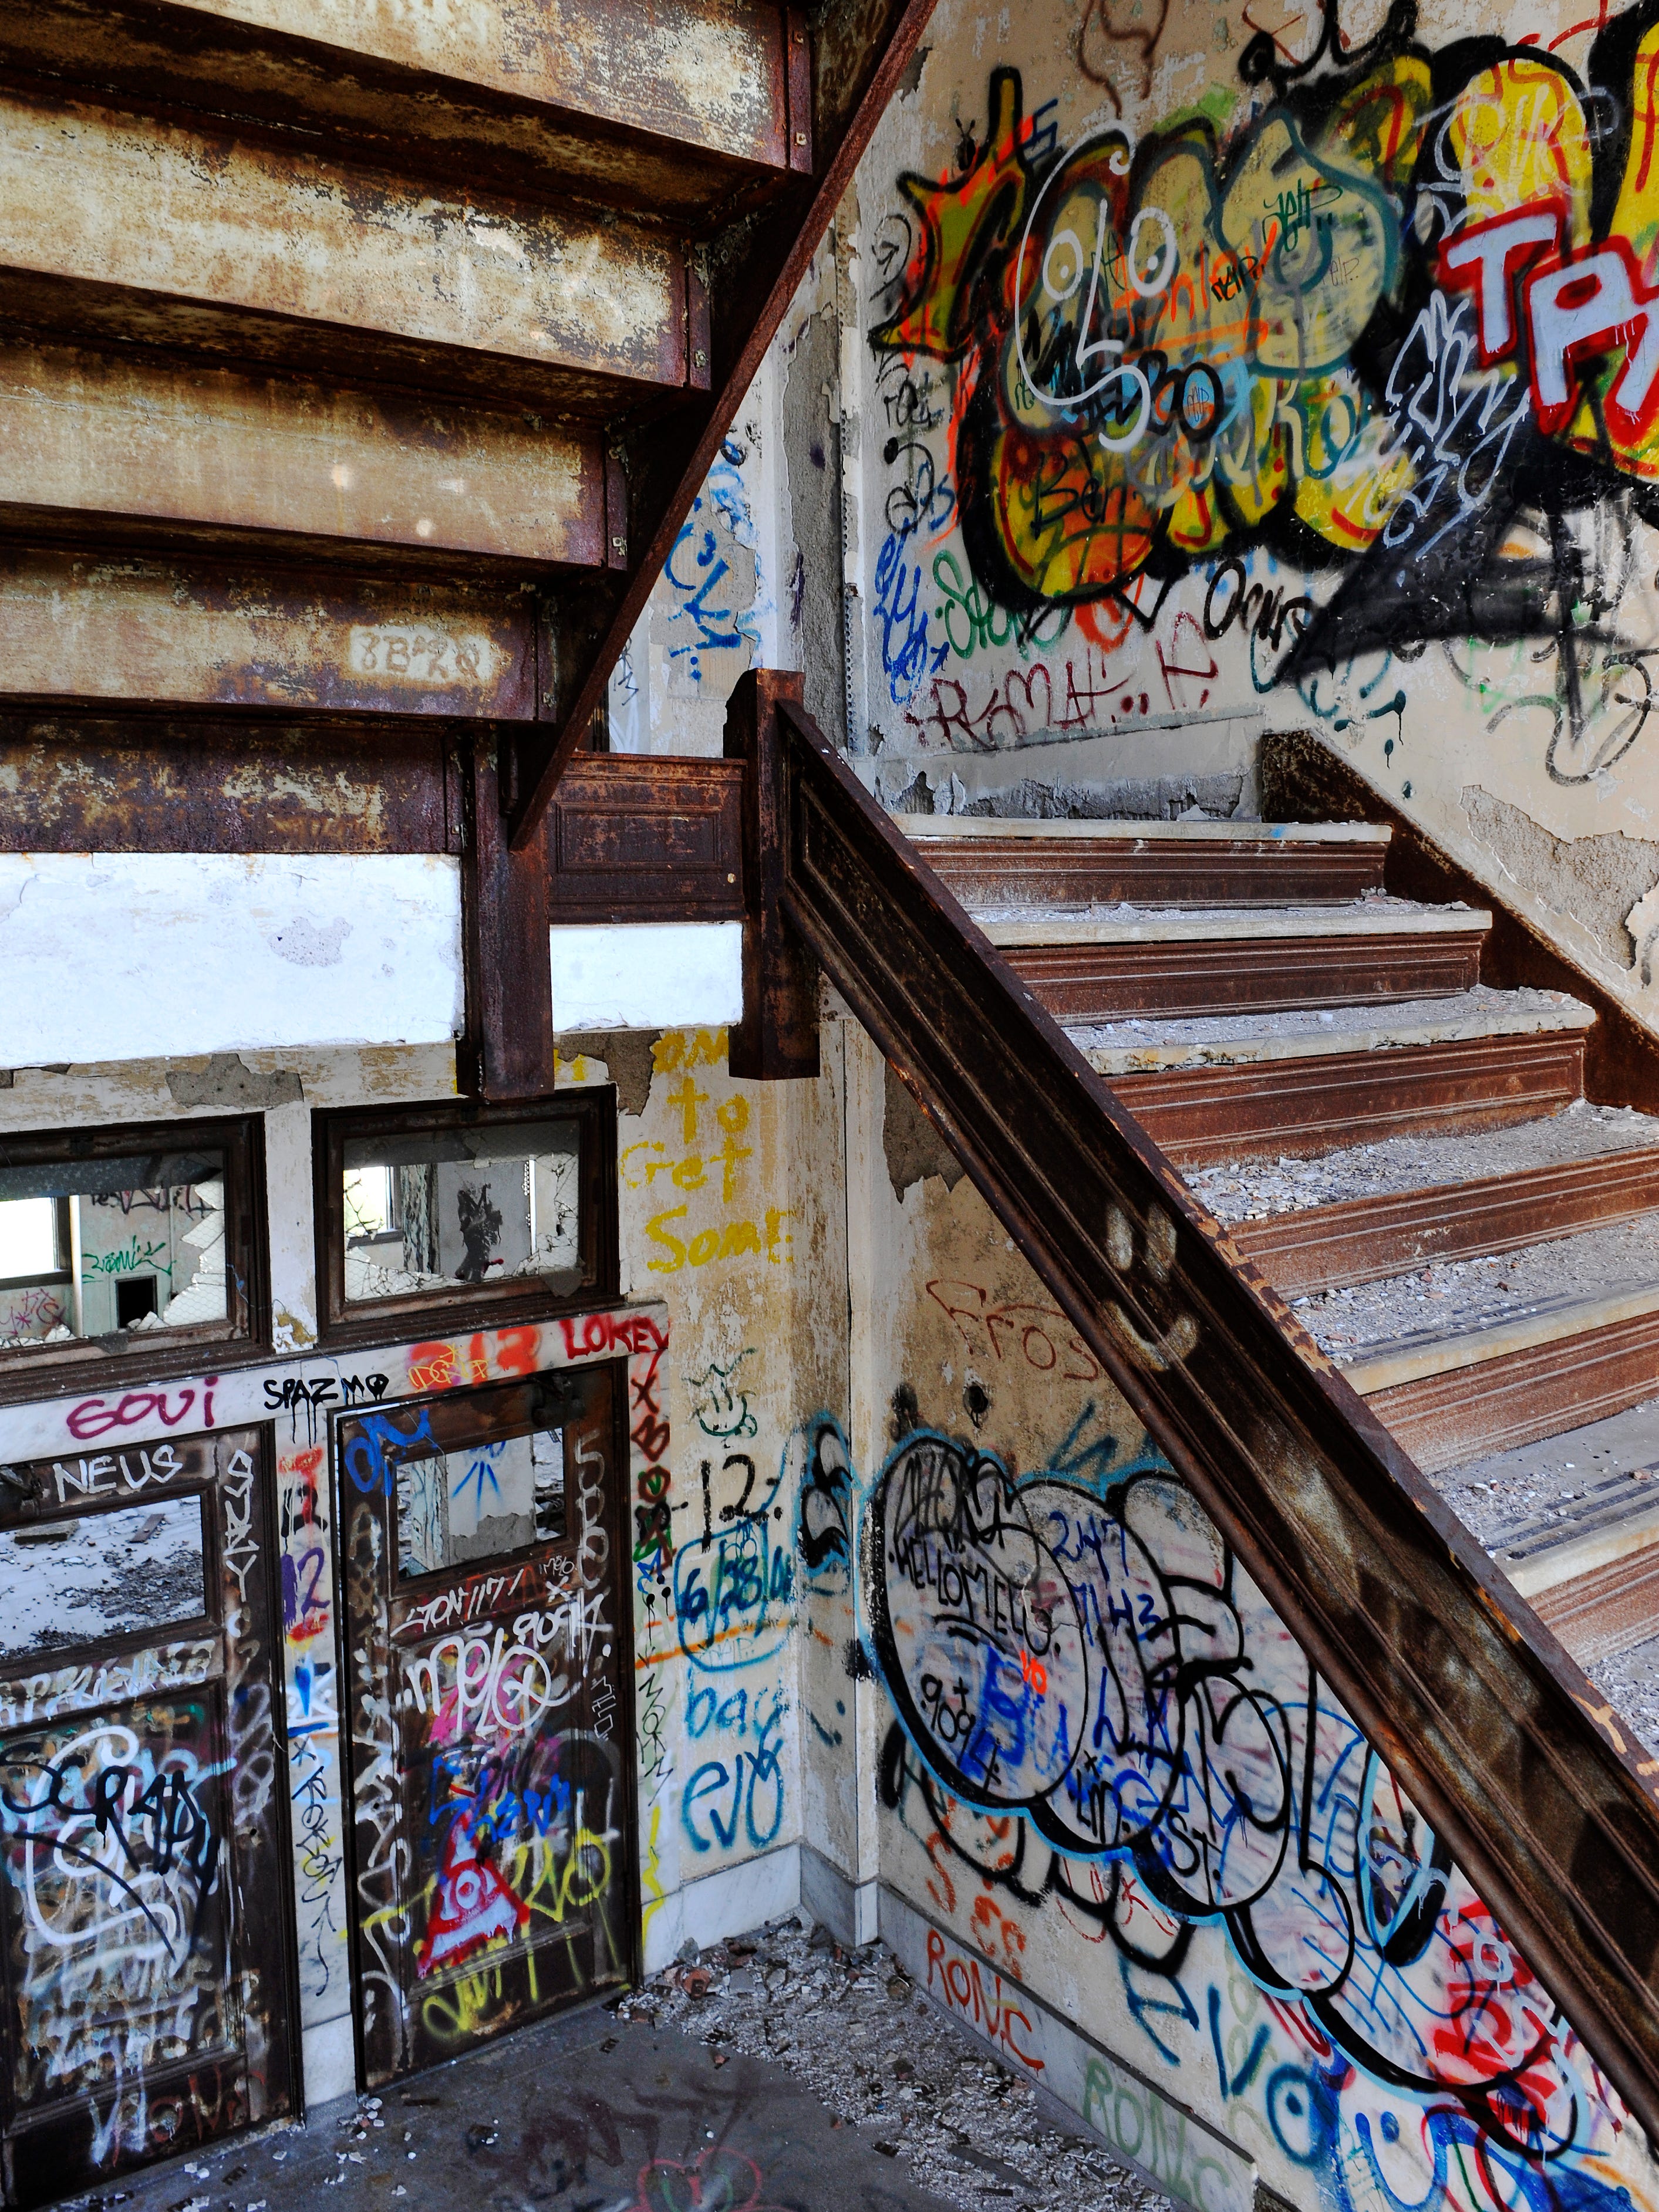 Graffiti covers the stairwells inside the station in 2011.